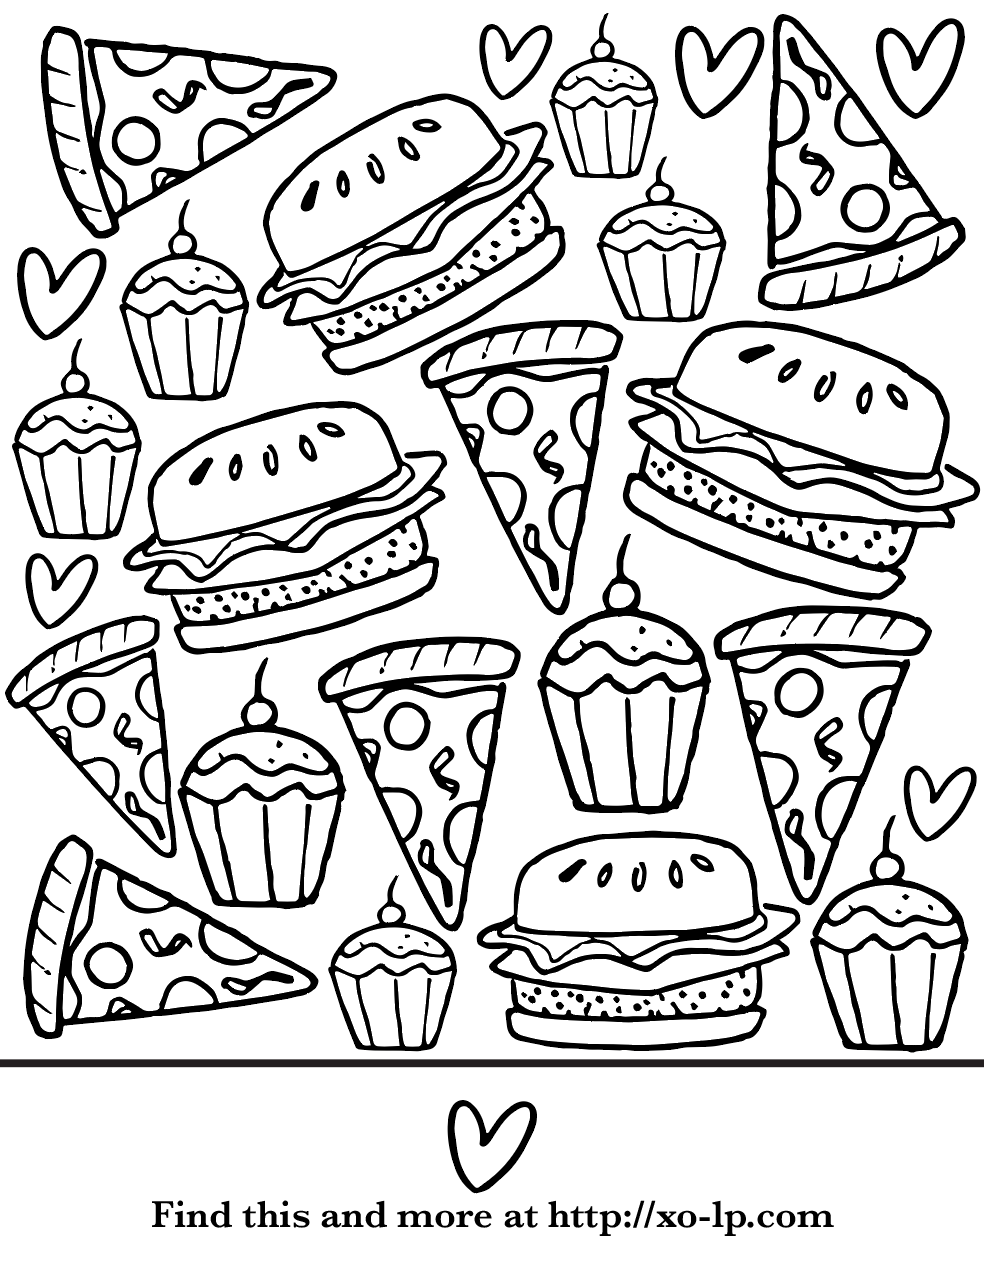 Food coloring pages, Coloring pages ...